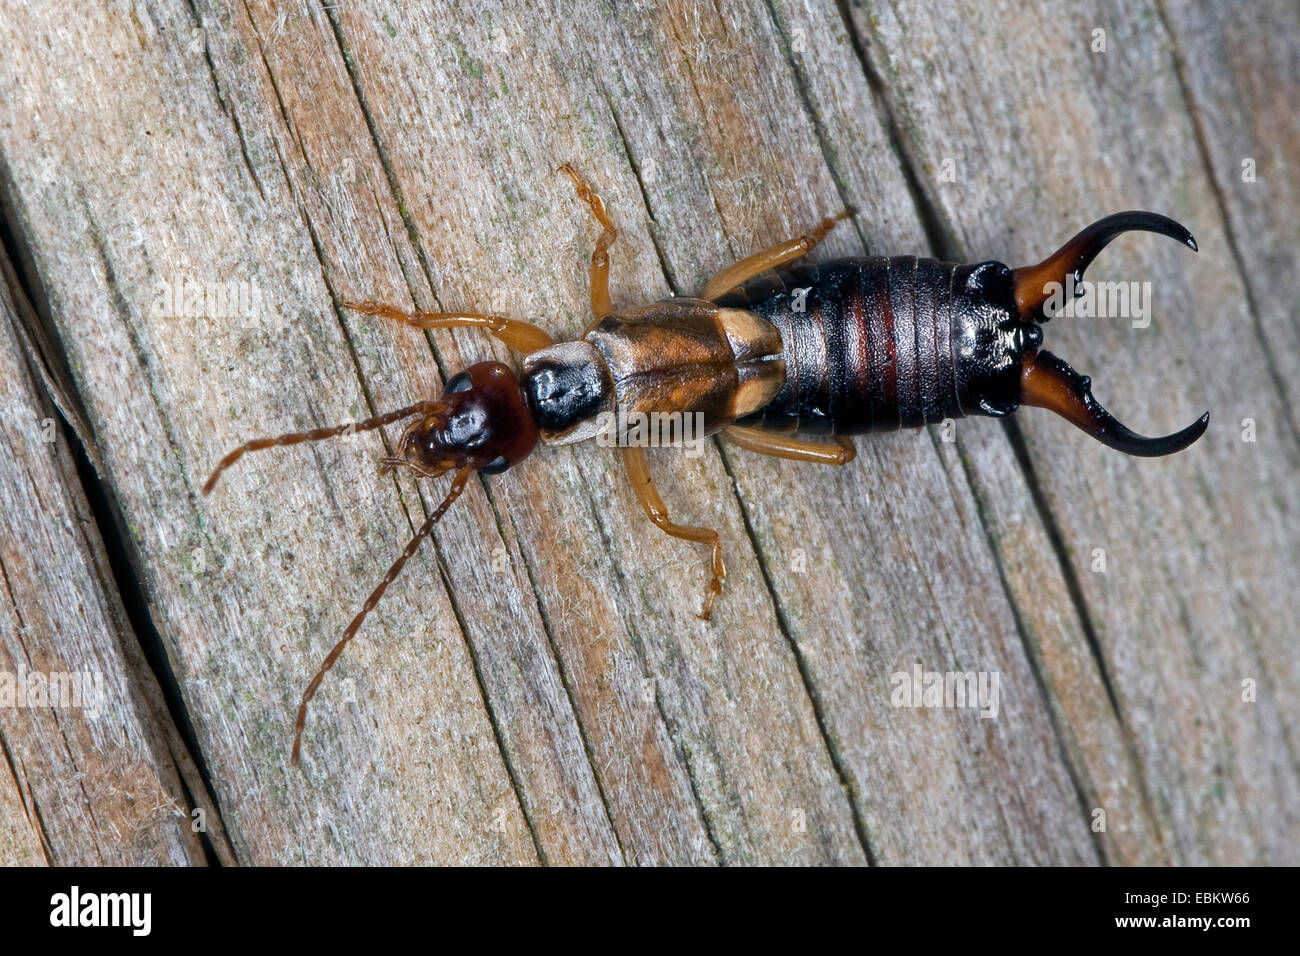 common earwig, European earwig (Forficula auricularia), male with large cerci sitting on deadwood, Germany Stock Photo